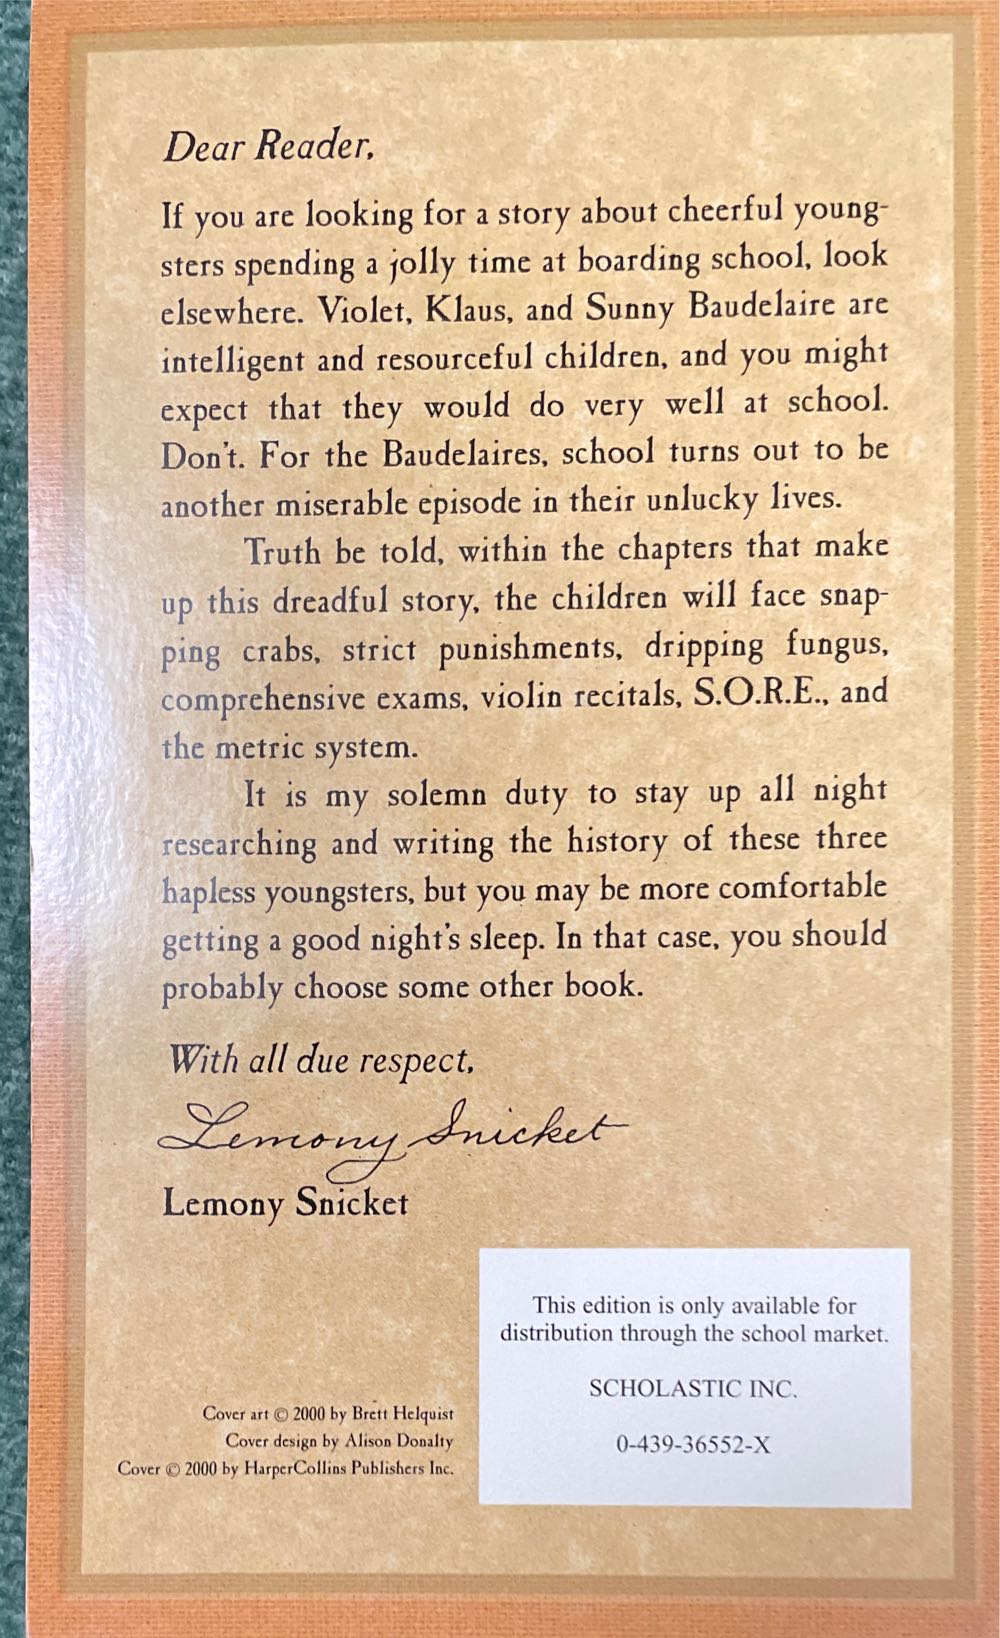 A Series Of Unfortunate Events #5: The Austere Academy - Lemony Snicket (Scholastic, Inc. - Paperback) book collectible [Barcode 9780439365529] - Main Image 2